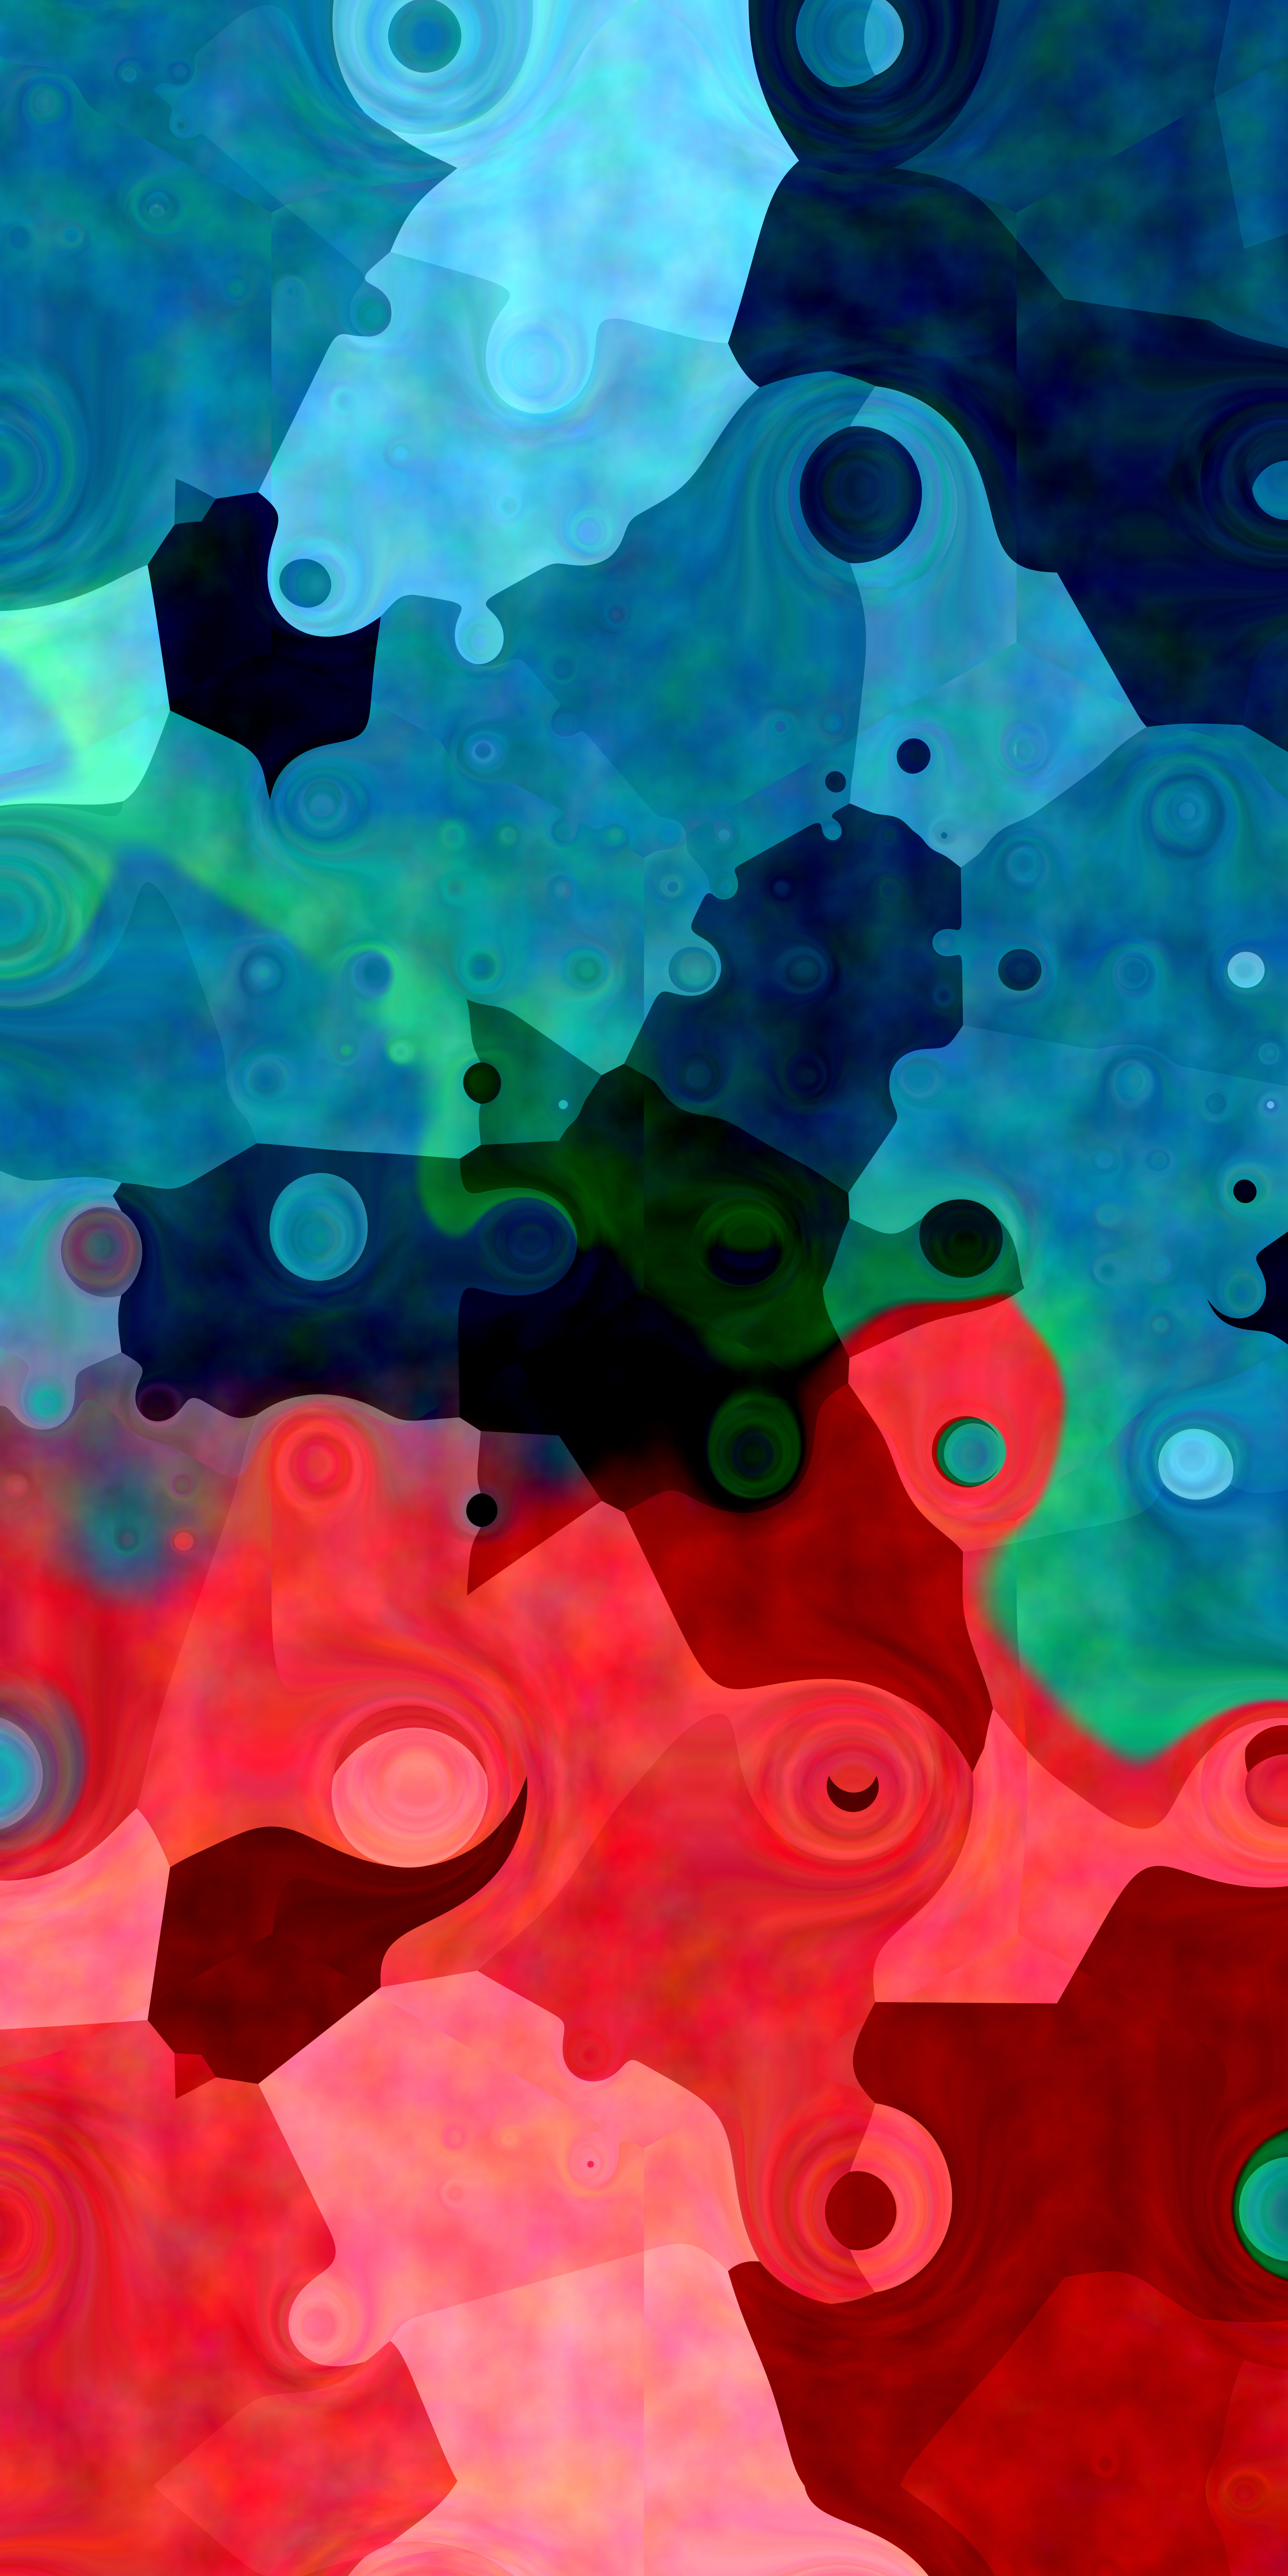 stains, abstract, multicolored, motley, spots, digital images